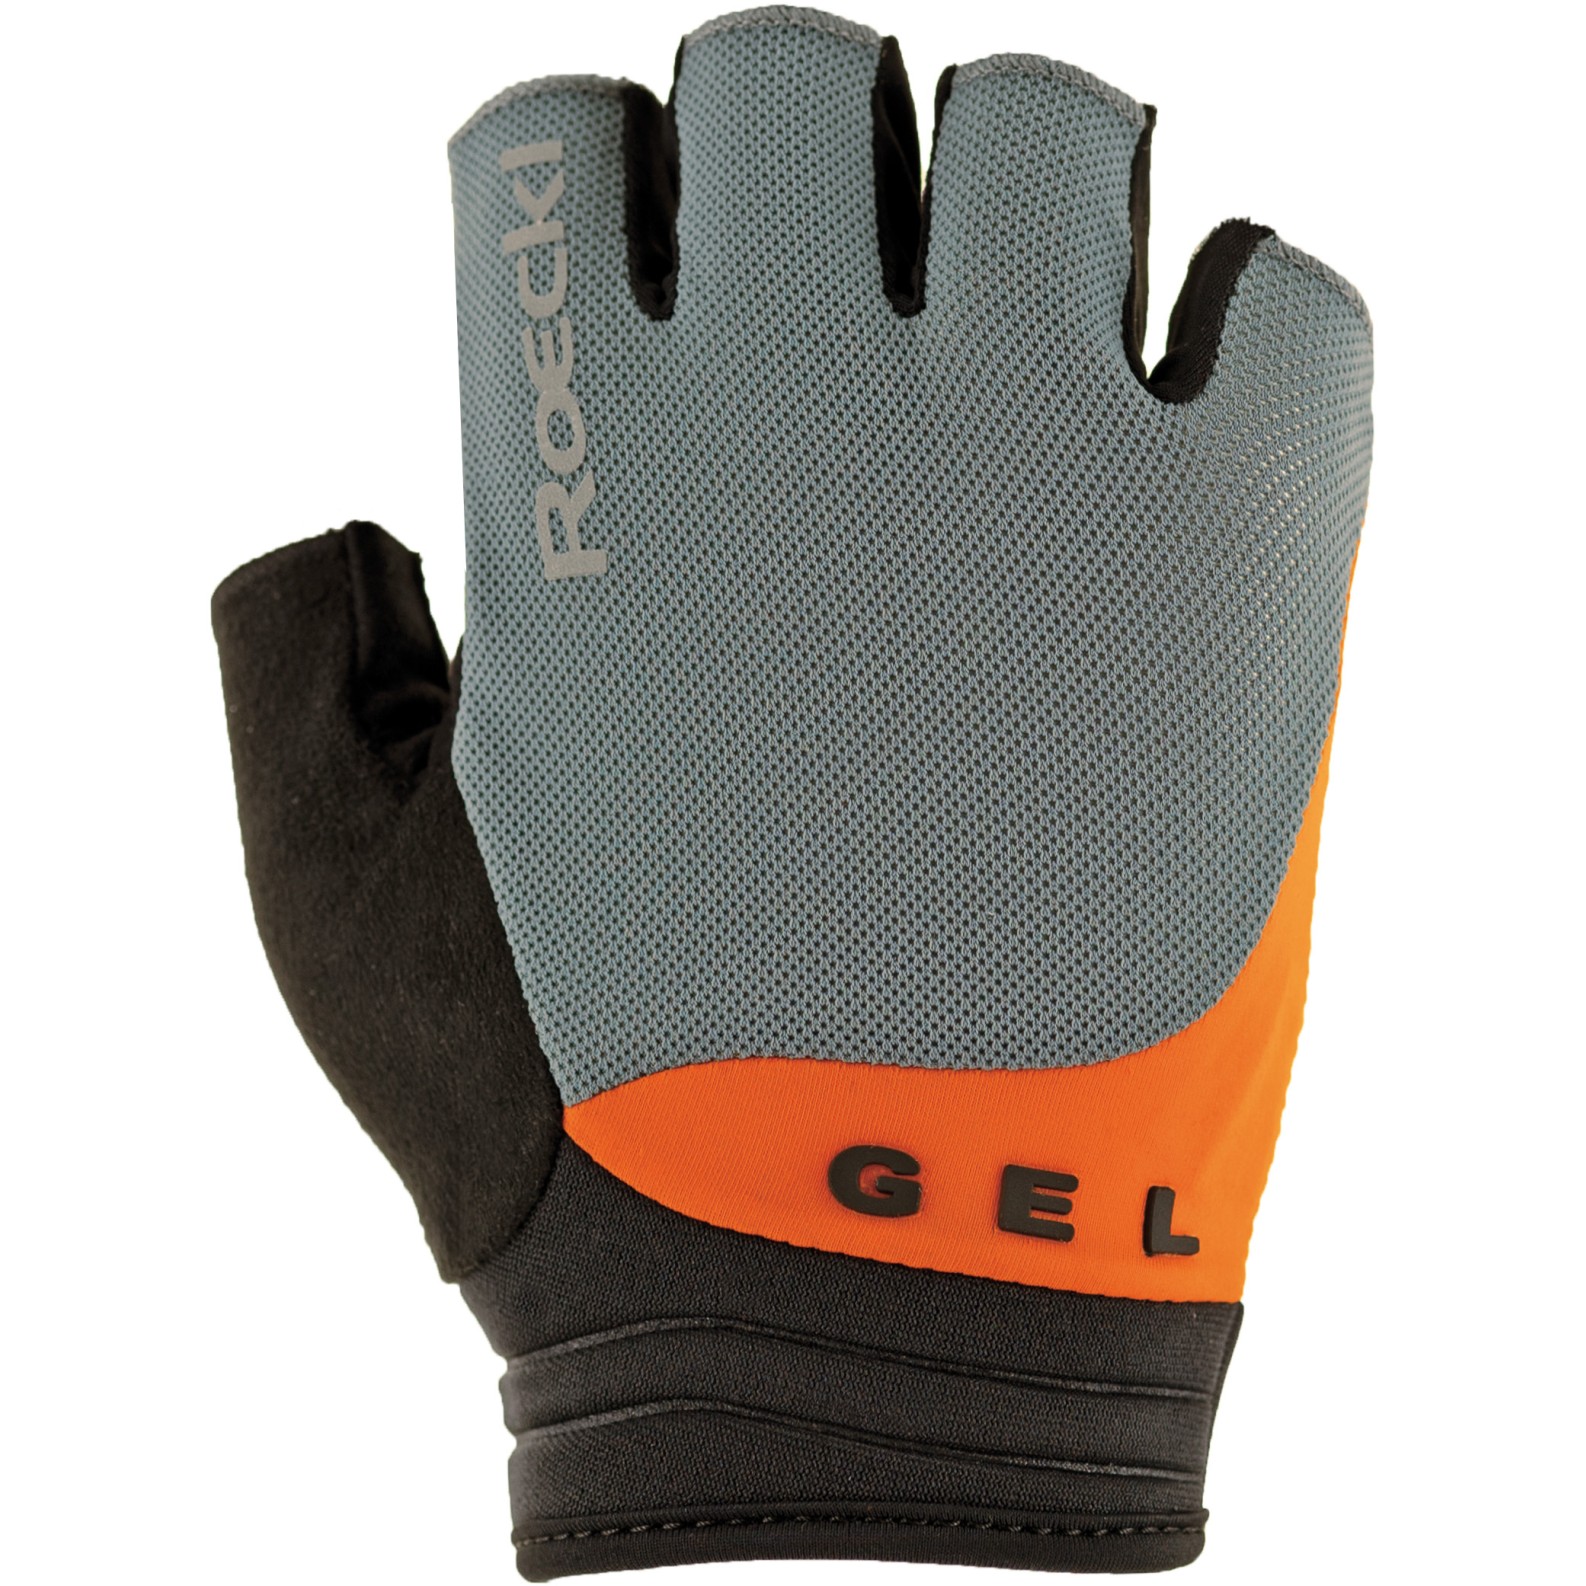 Picture of Roeckl Sports Itamos 2 Cycling Gloves - hurricane grey/orange 8504